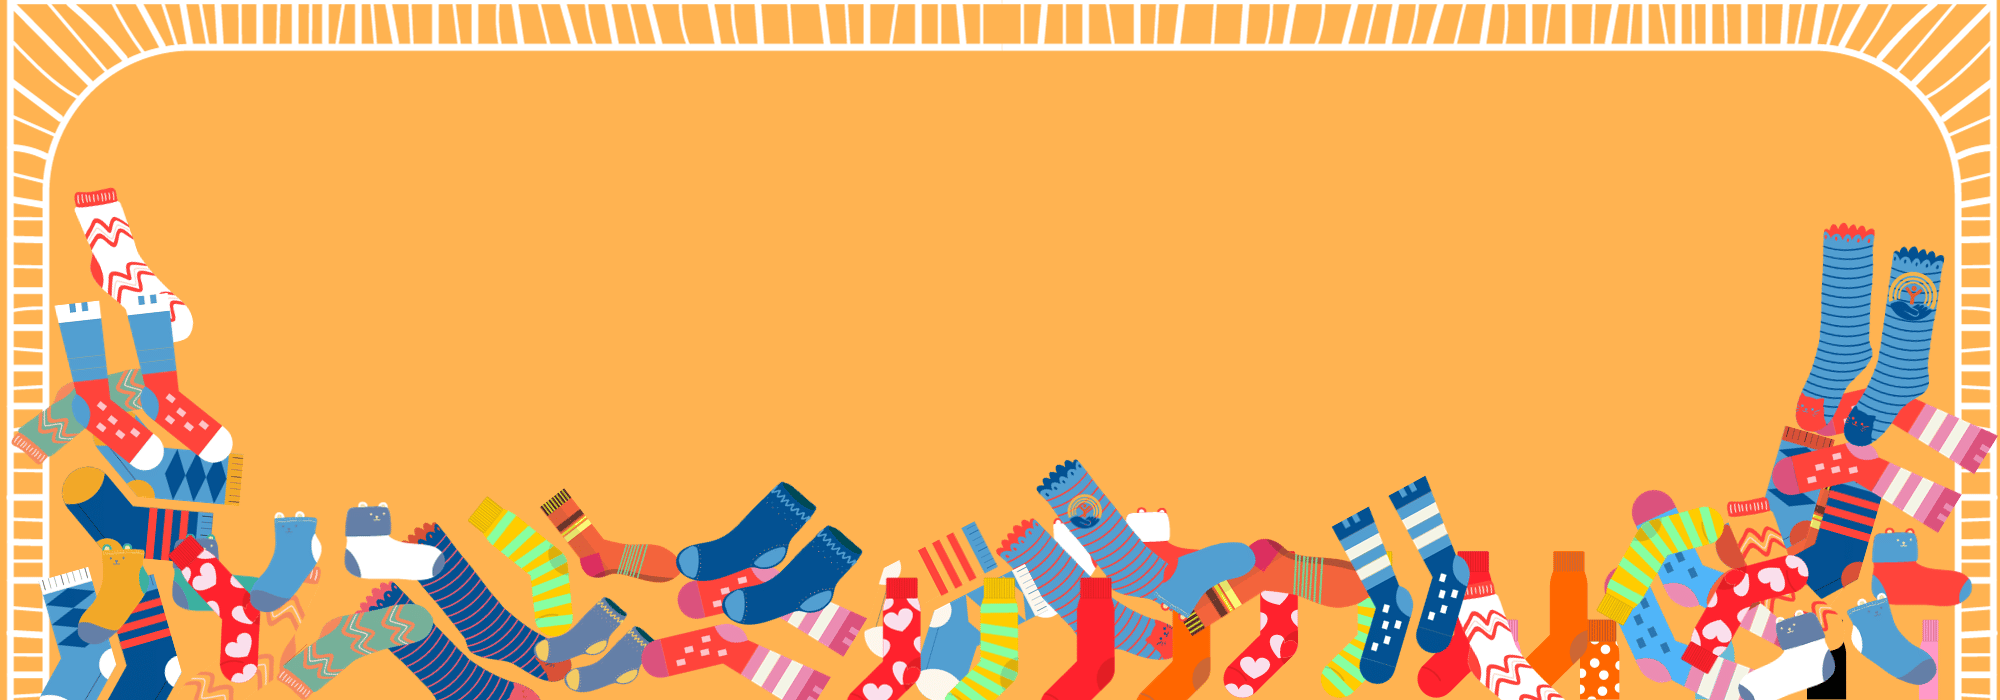 Image of many colorful pairs of socks piled up.